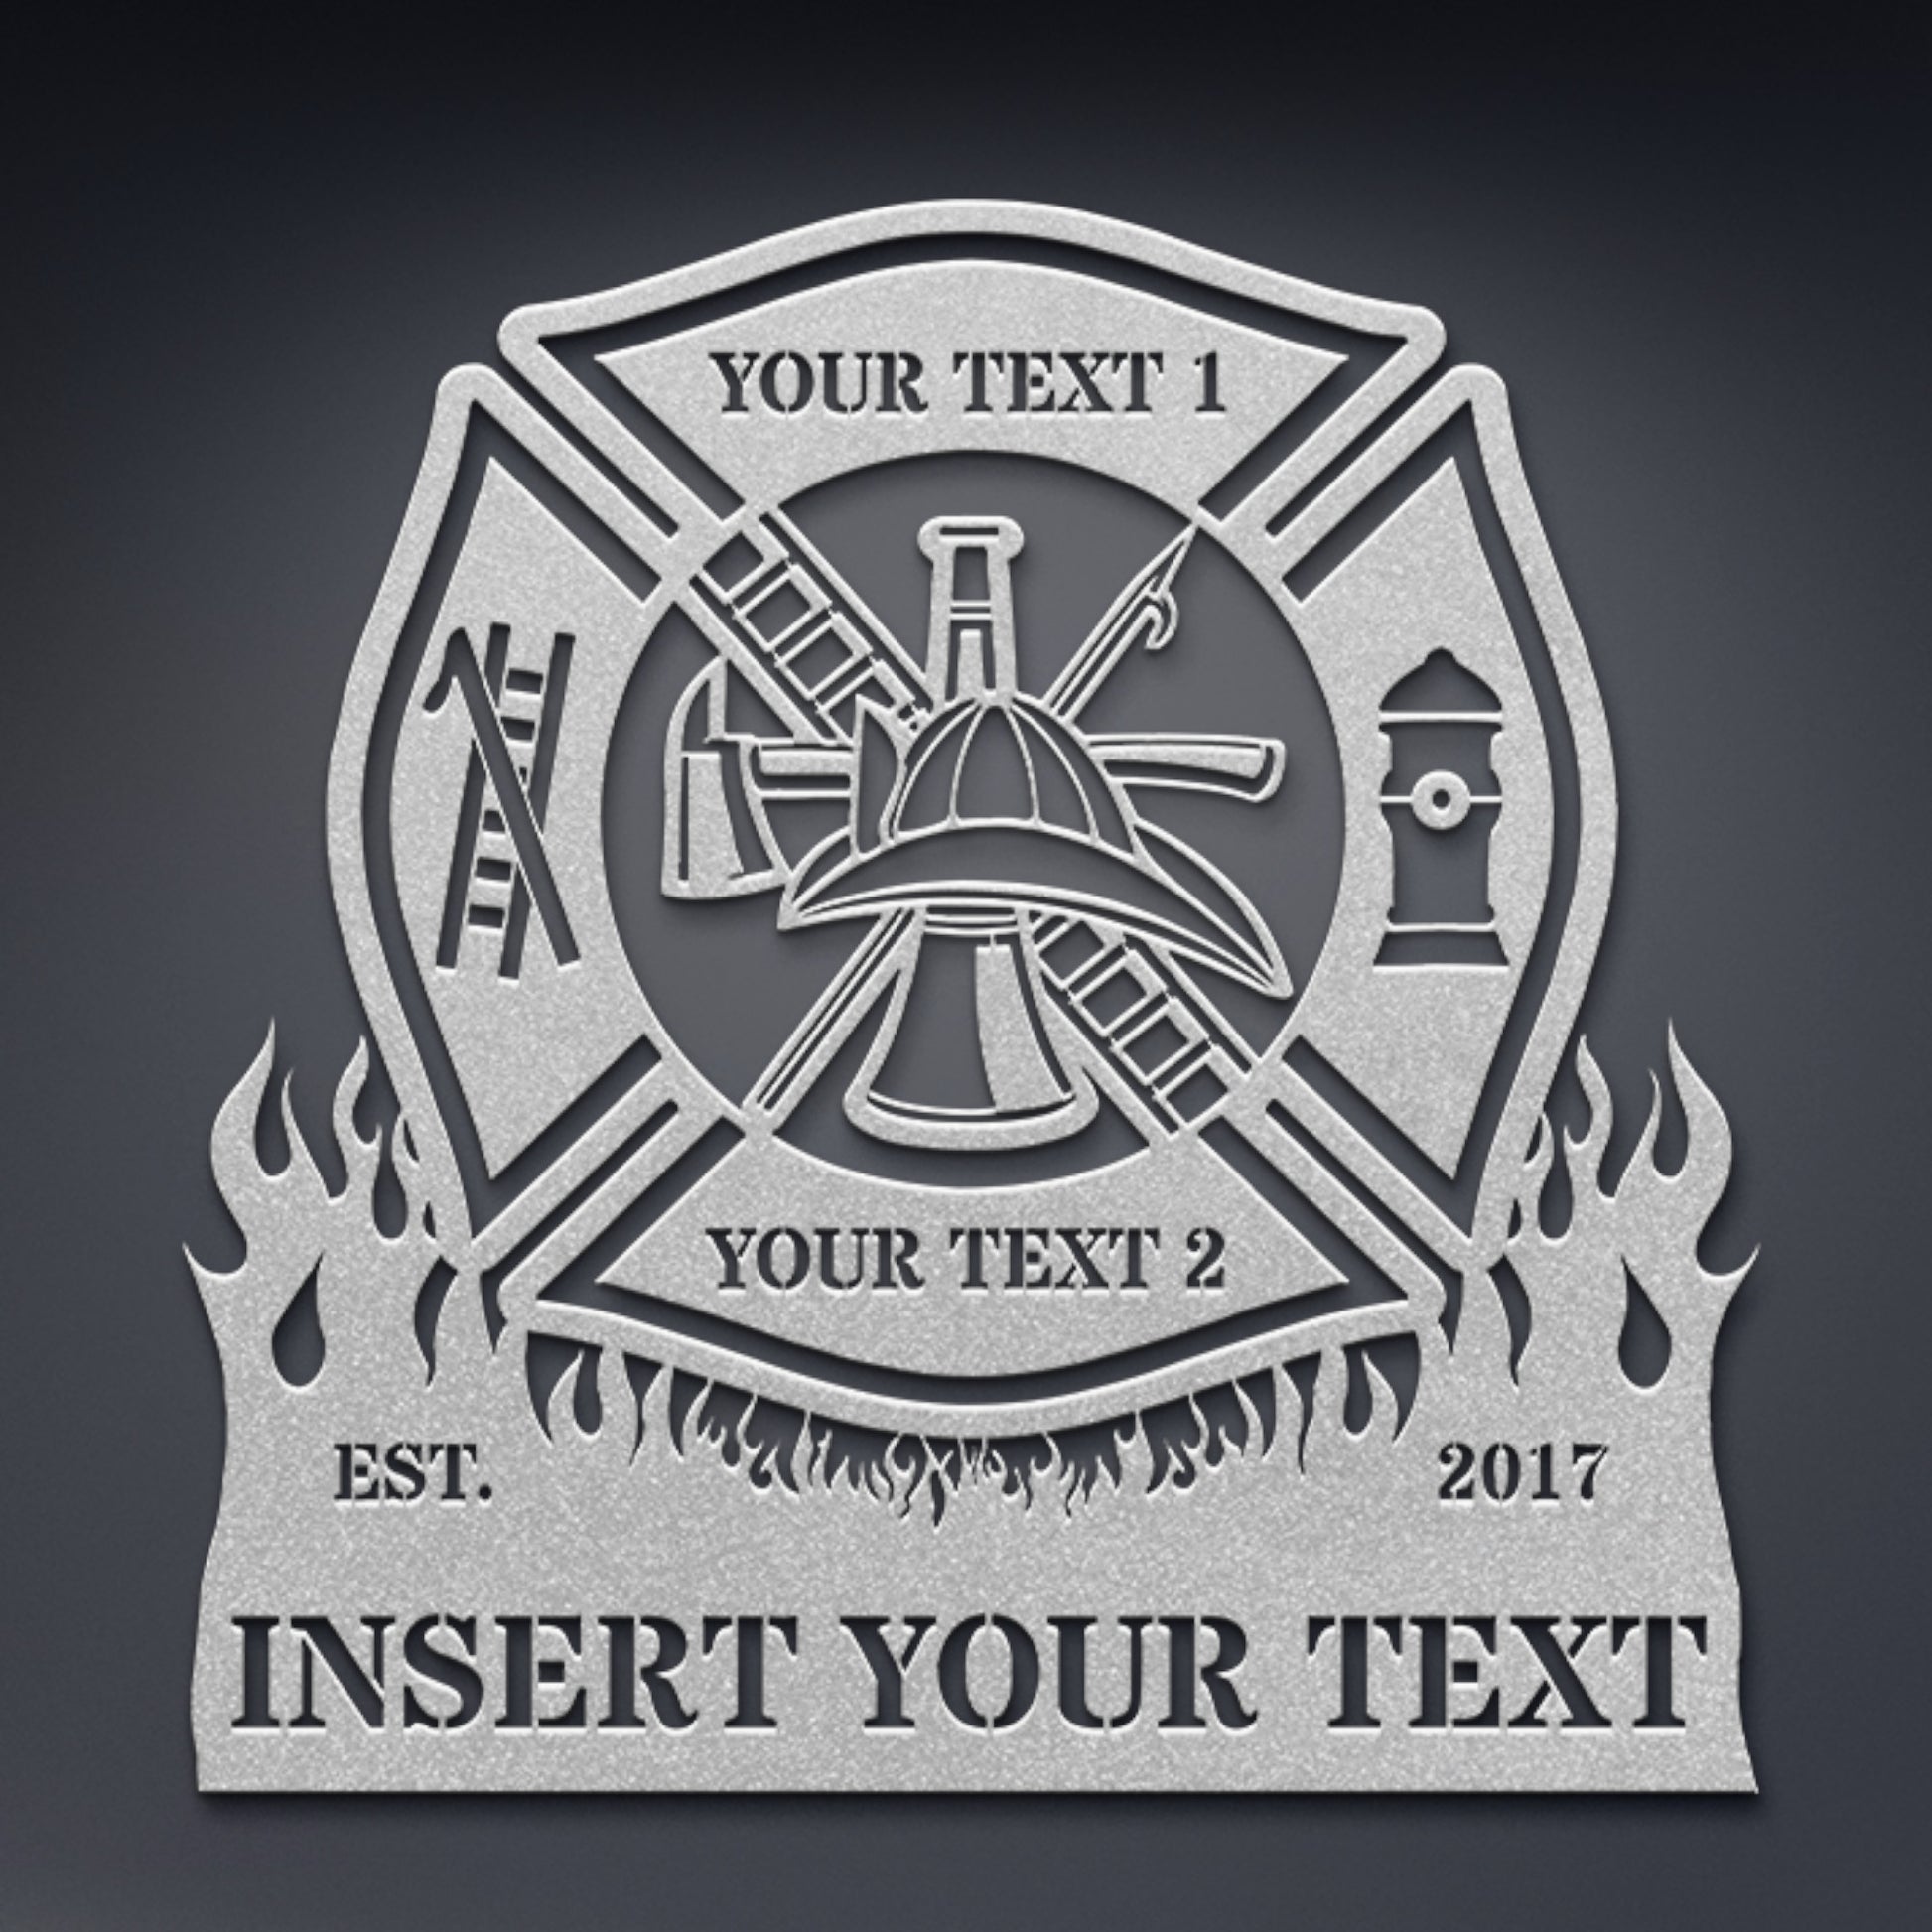 Firefighter Personalized Maltese Cross Black Metal Sign With Your Custom Text